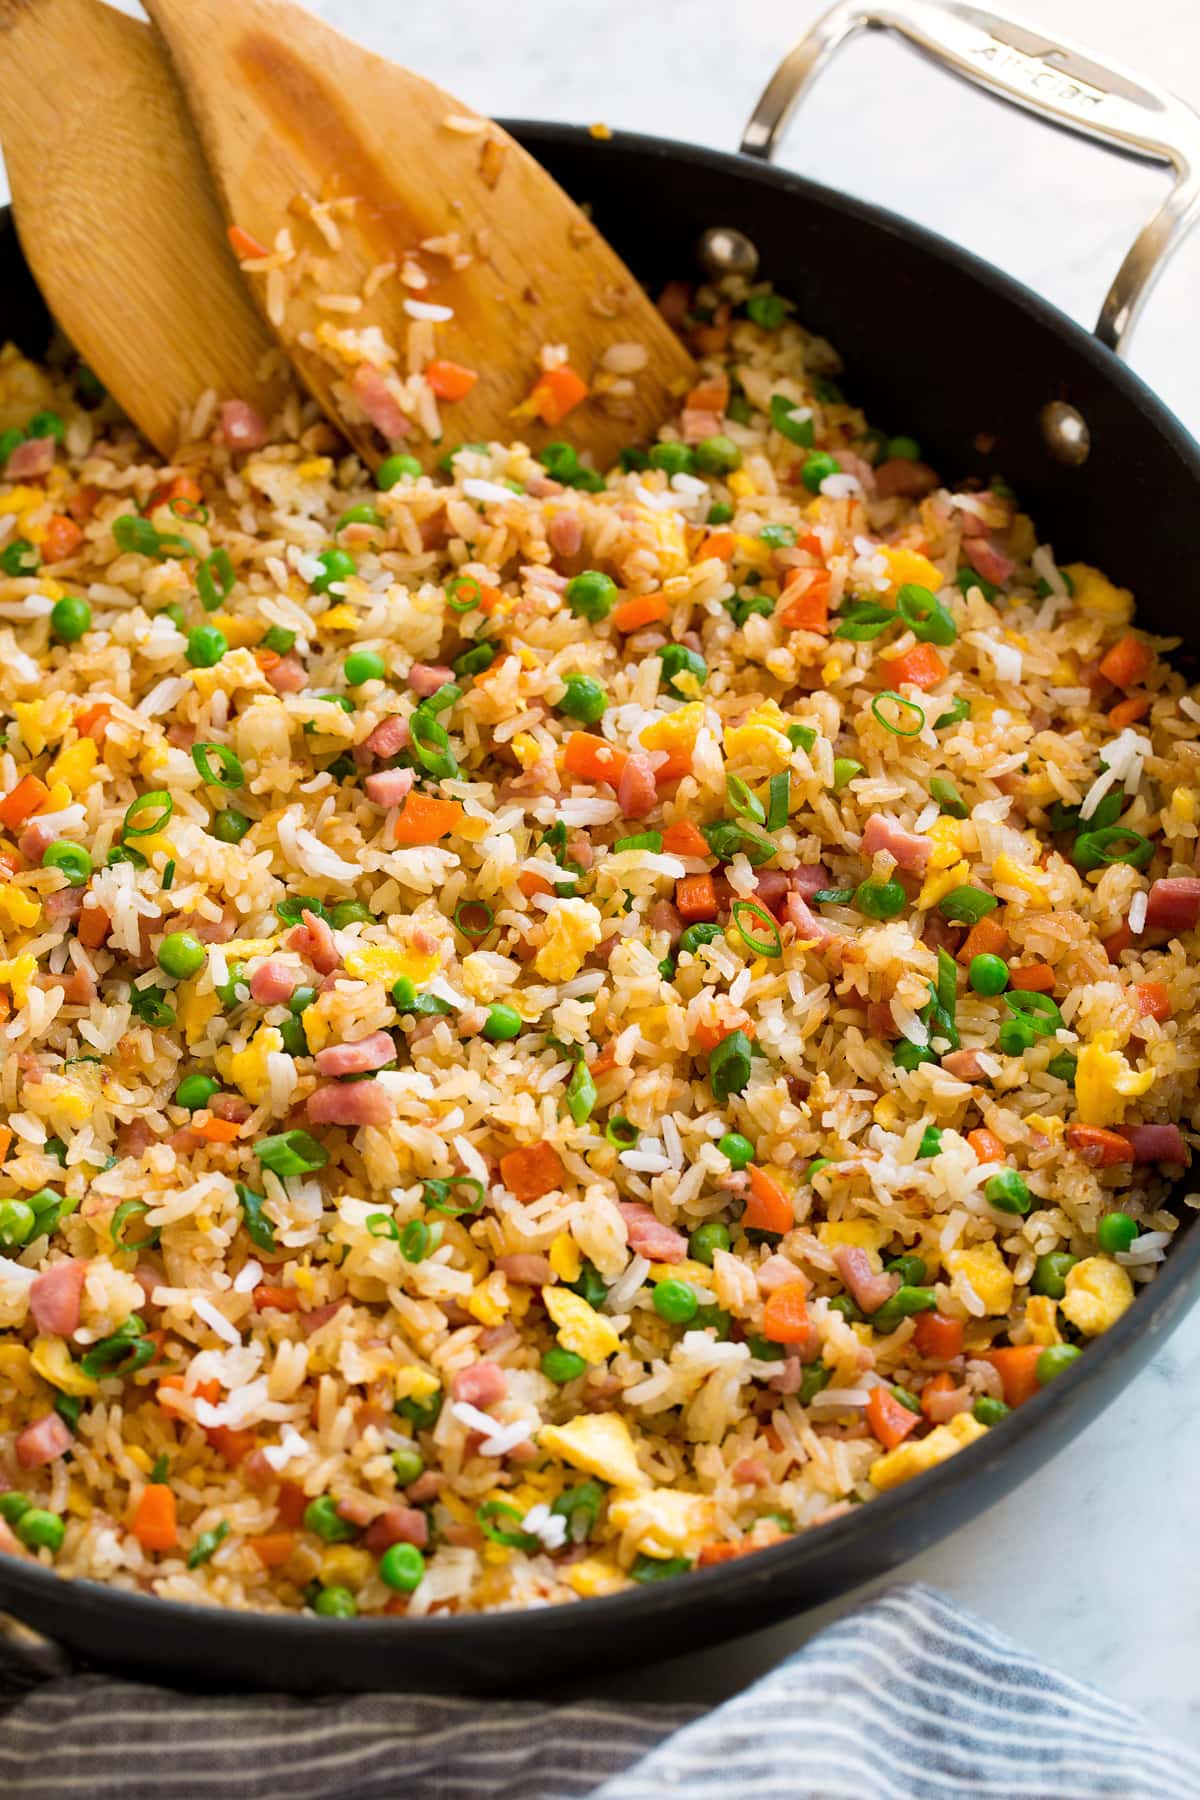 Best Fried Rice Recipe - Cooking Classy